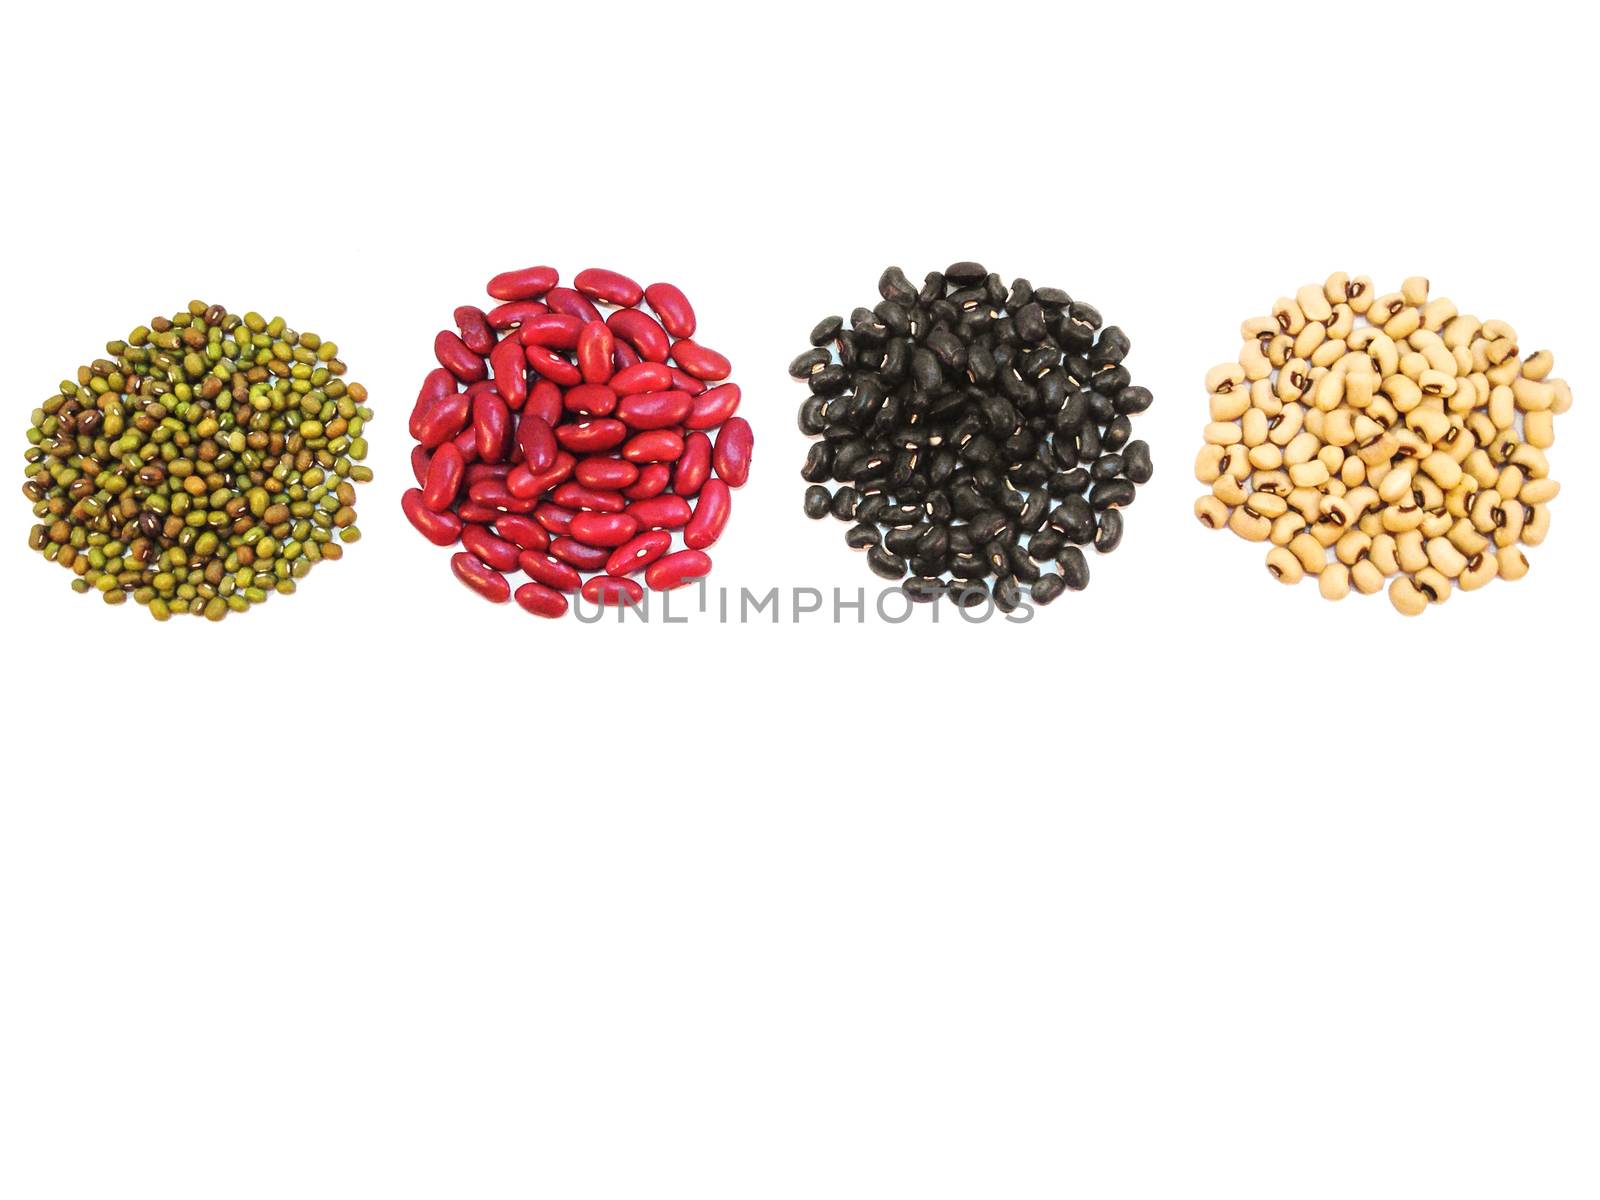 Black eye peas, mung beans, black beans and red kidney beans on white background